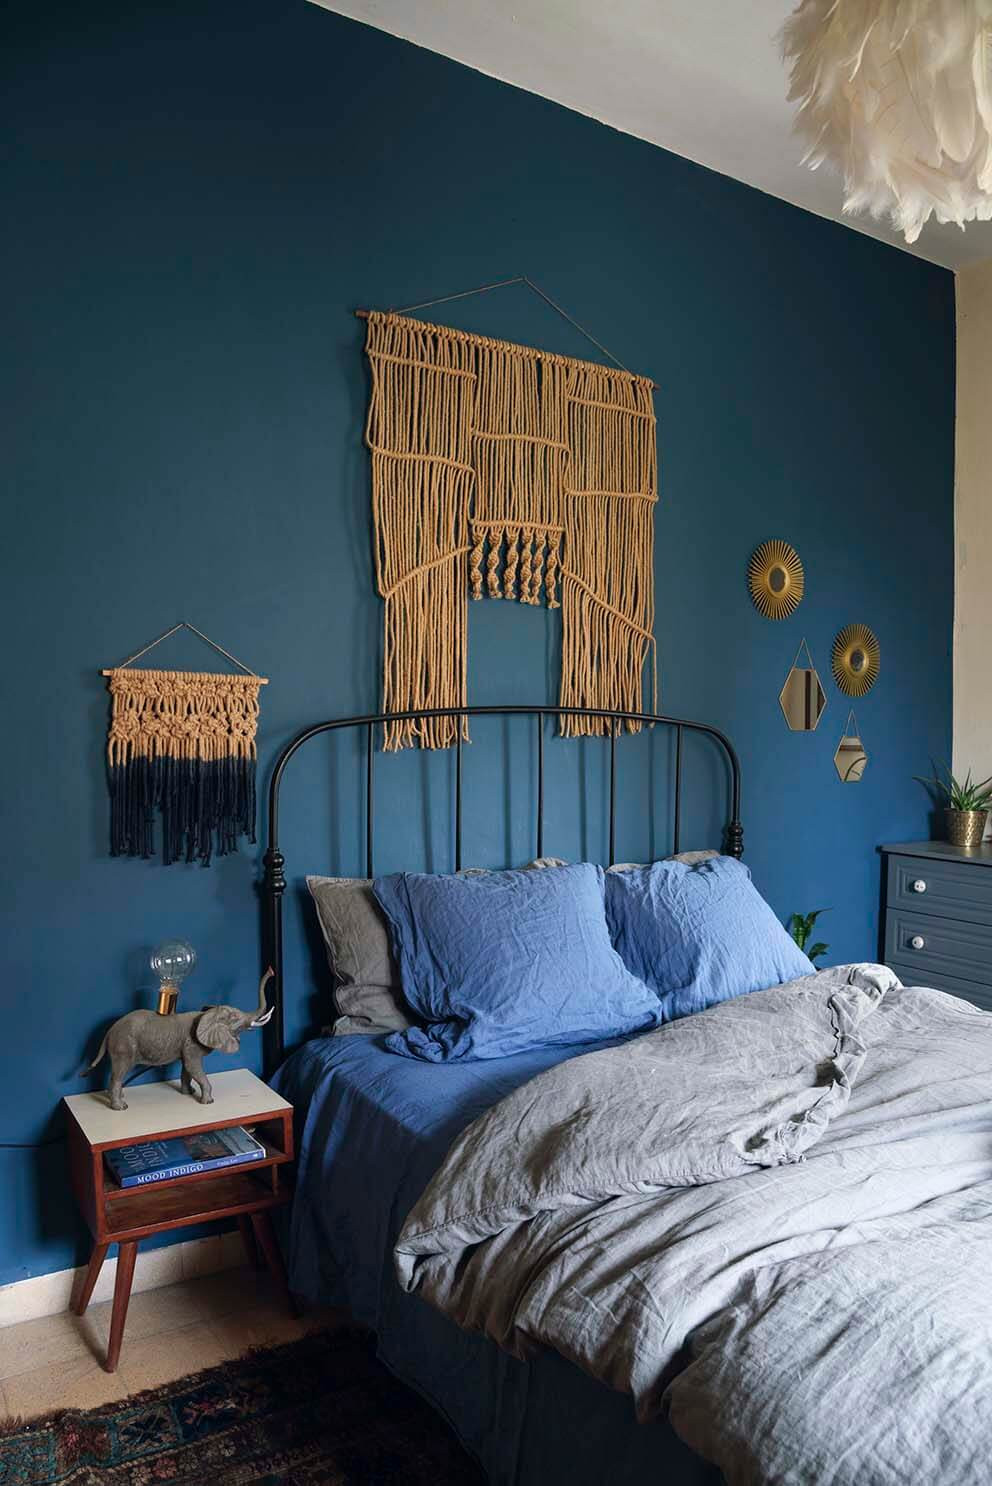 Blue Bedroom Walls
 This Is How To Decorate With Blue Walls